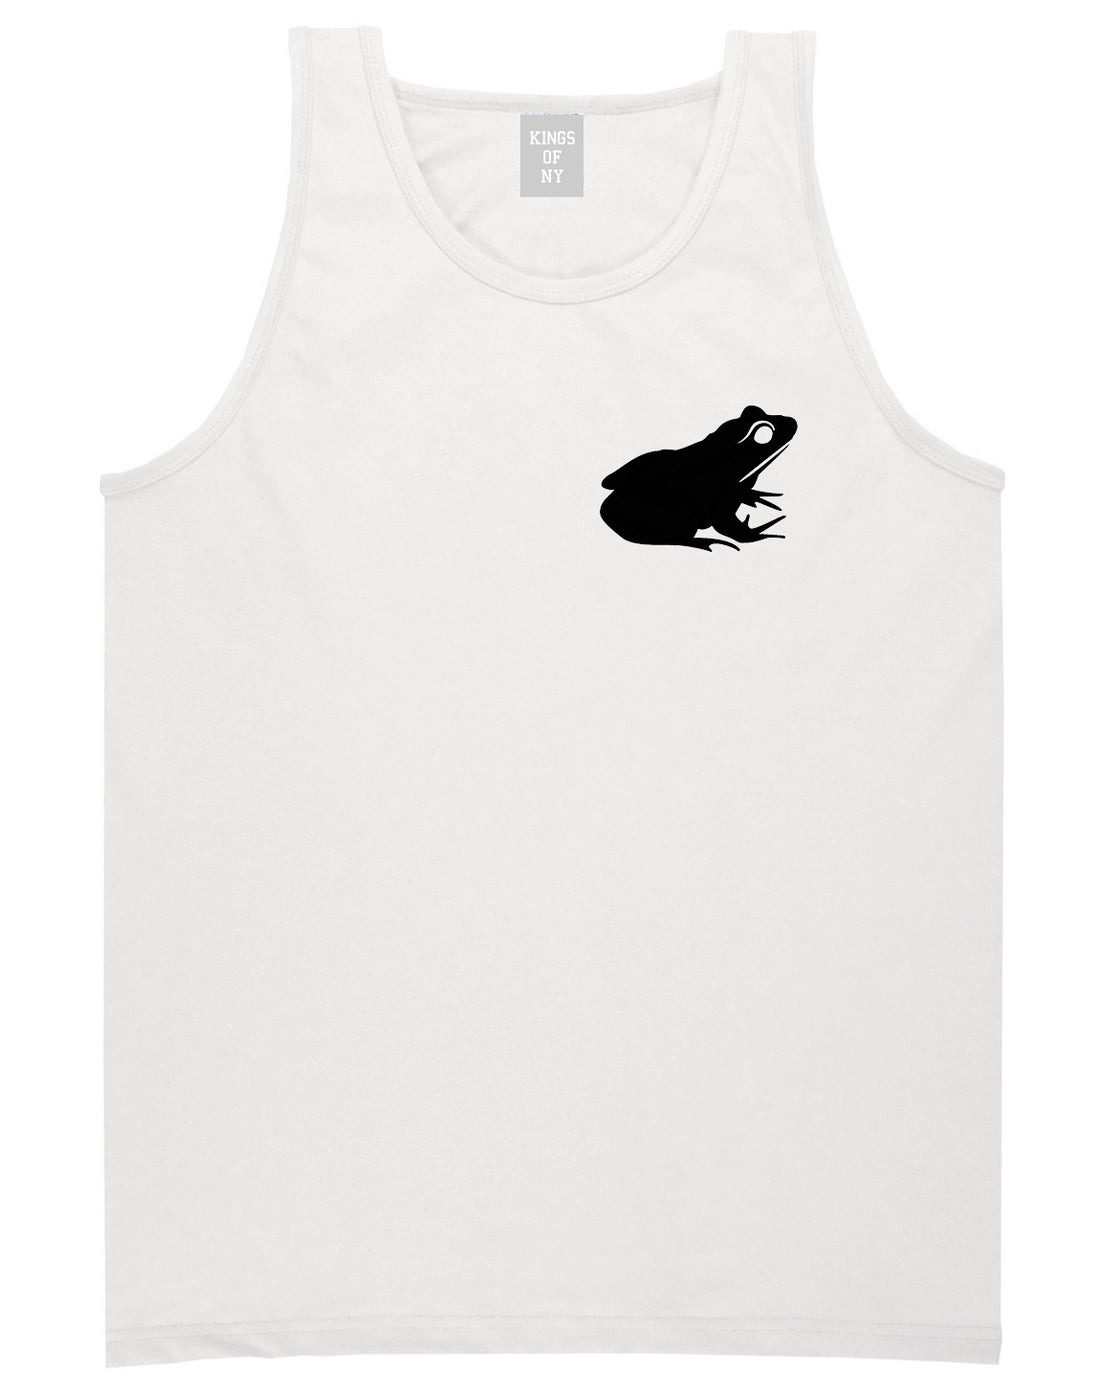 Frog Animal Chest Mens White Tank Top Shirt by KINGS OF NY